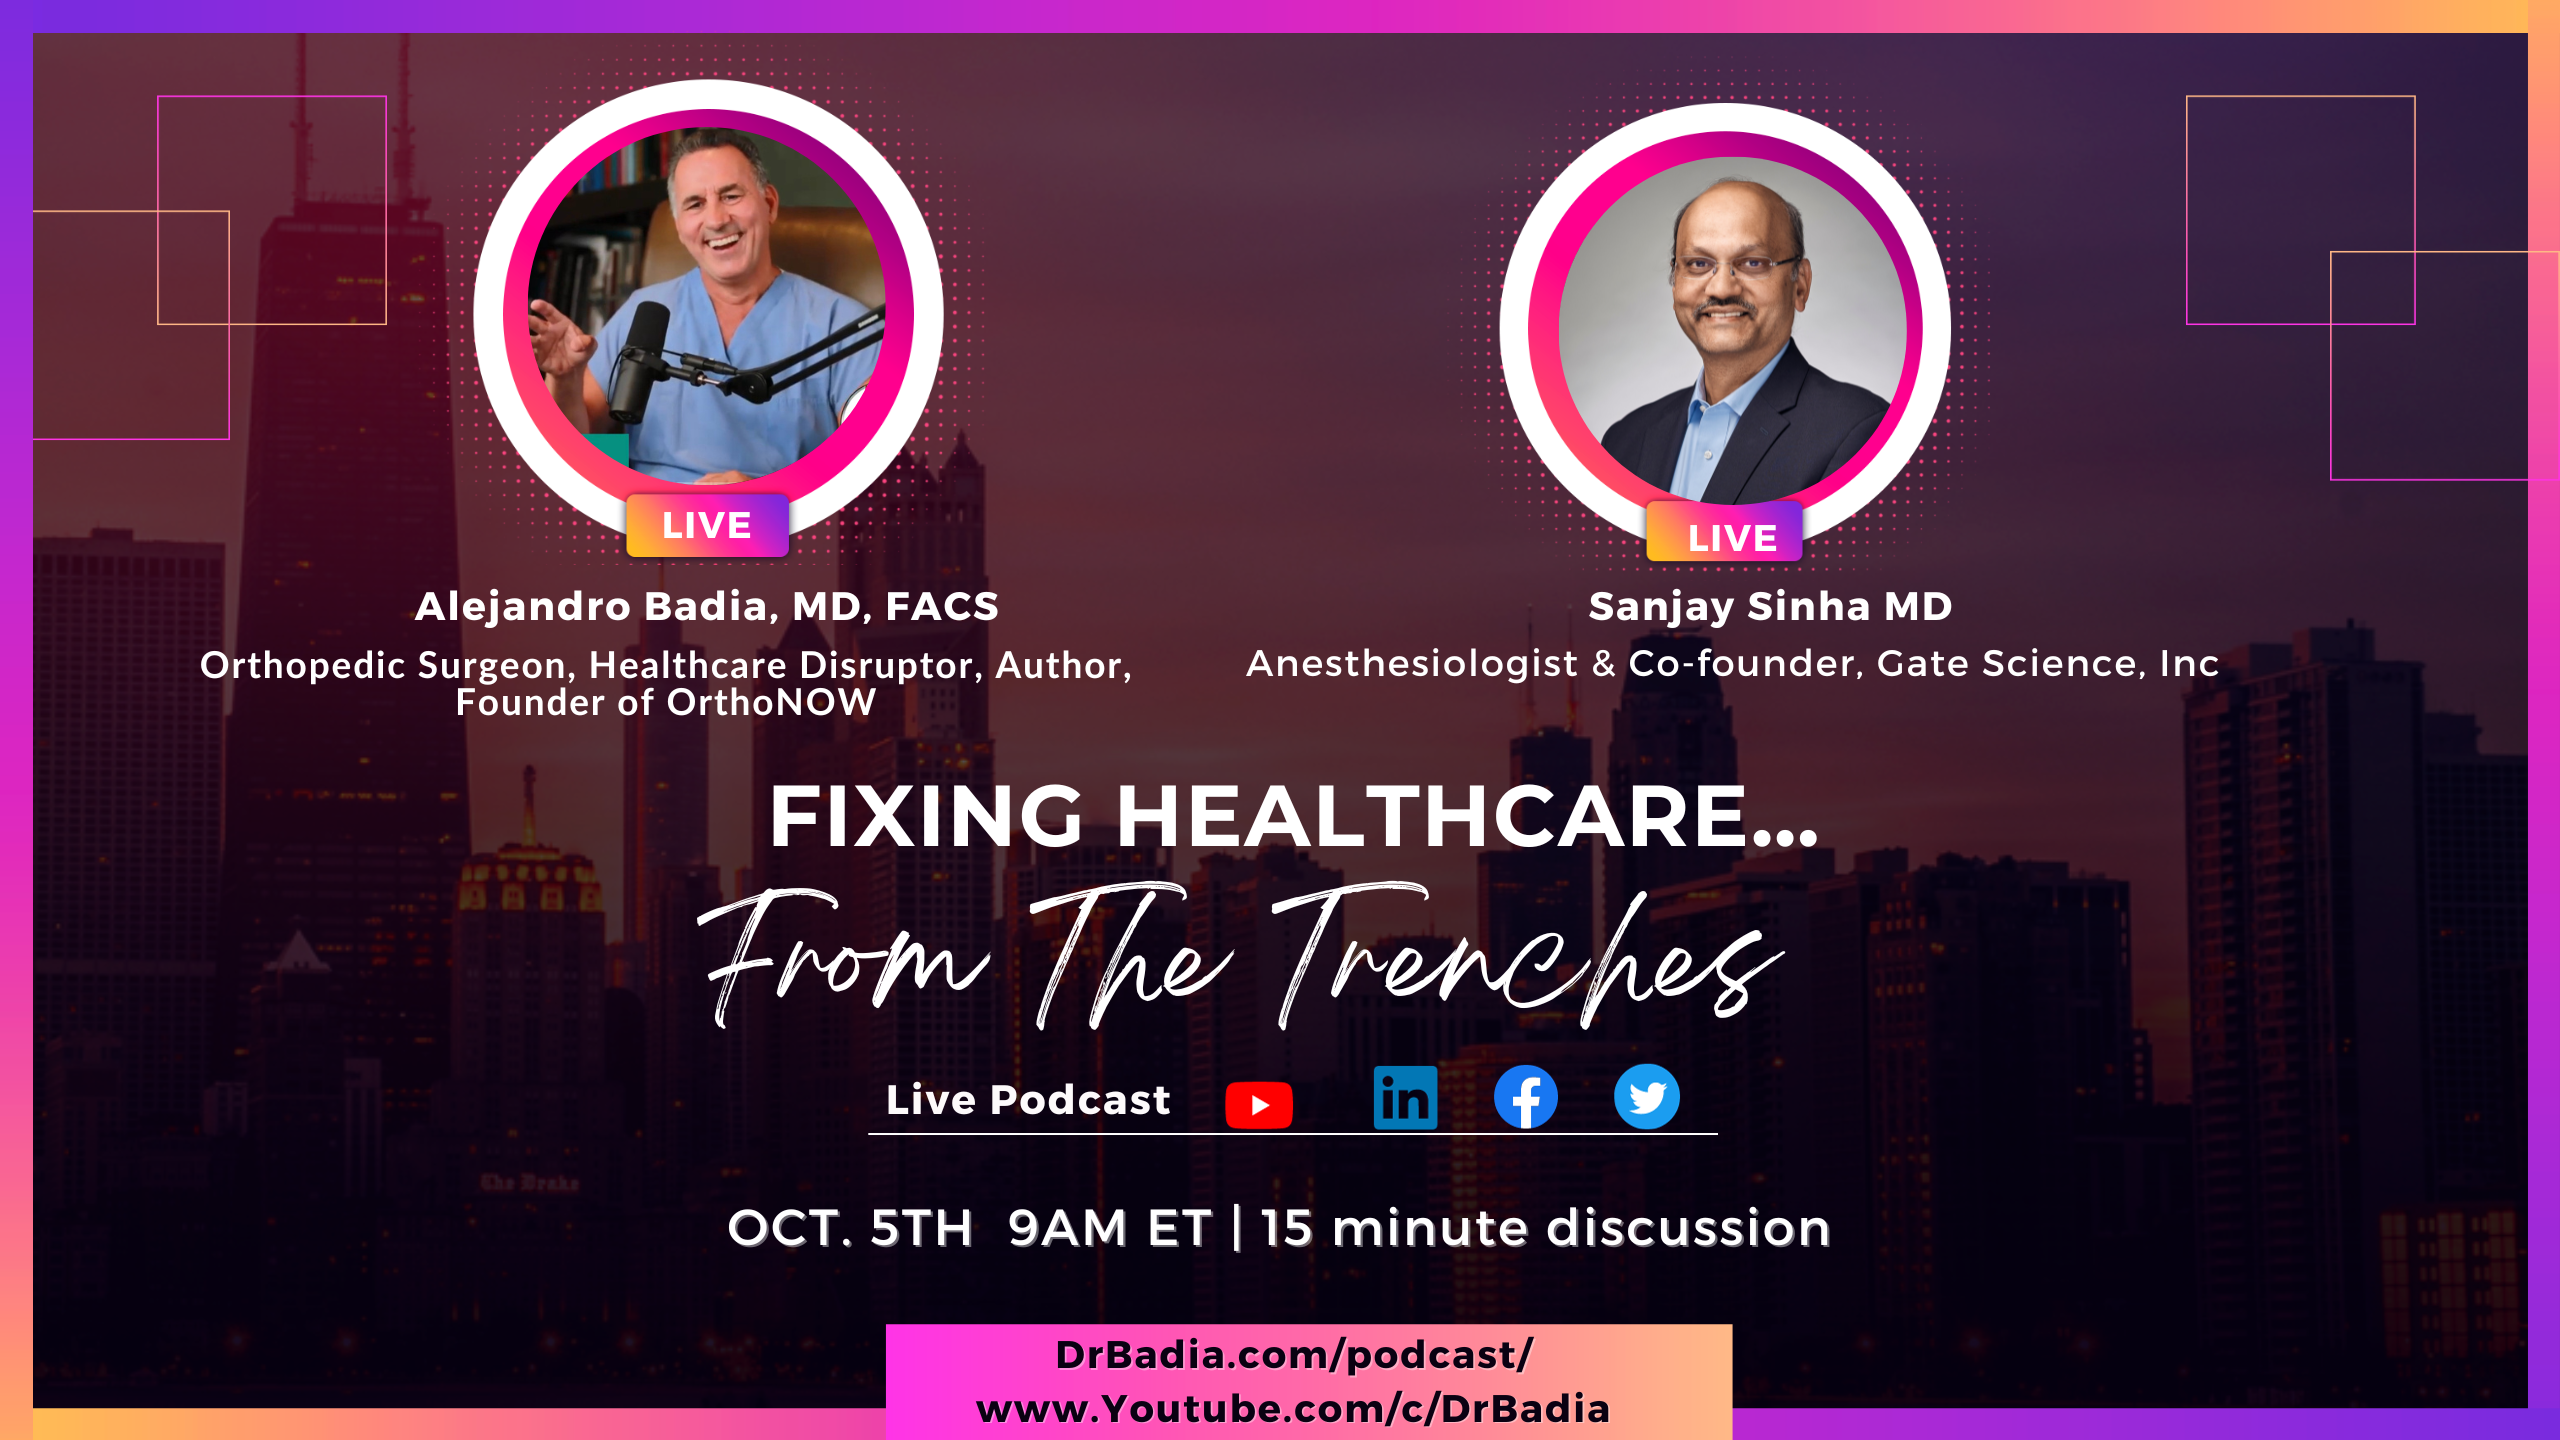 Episode 21 Fixing Healthcare...From The Trenches